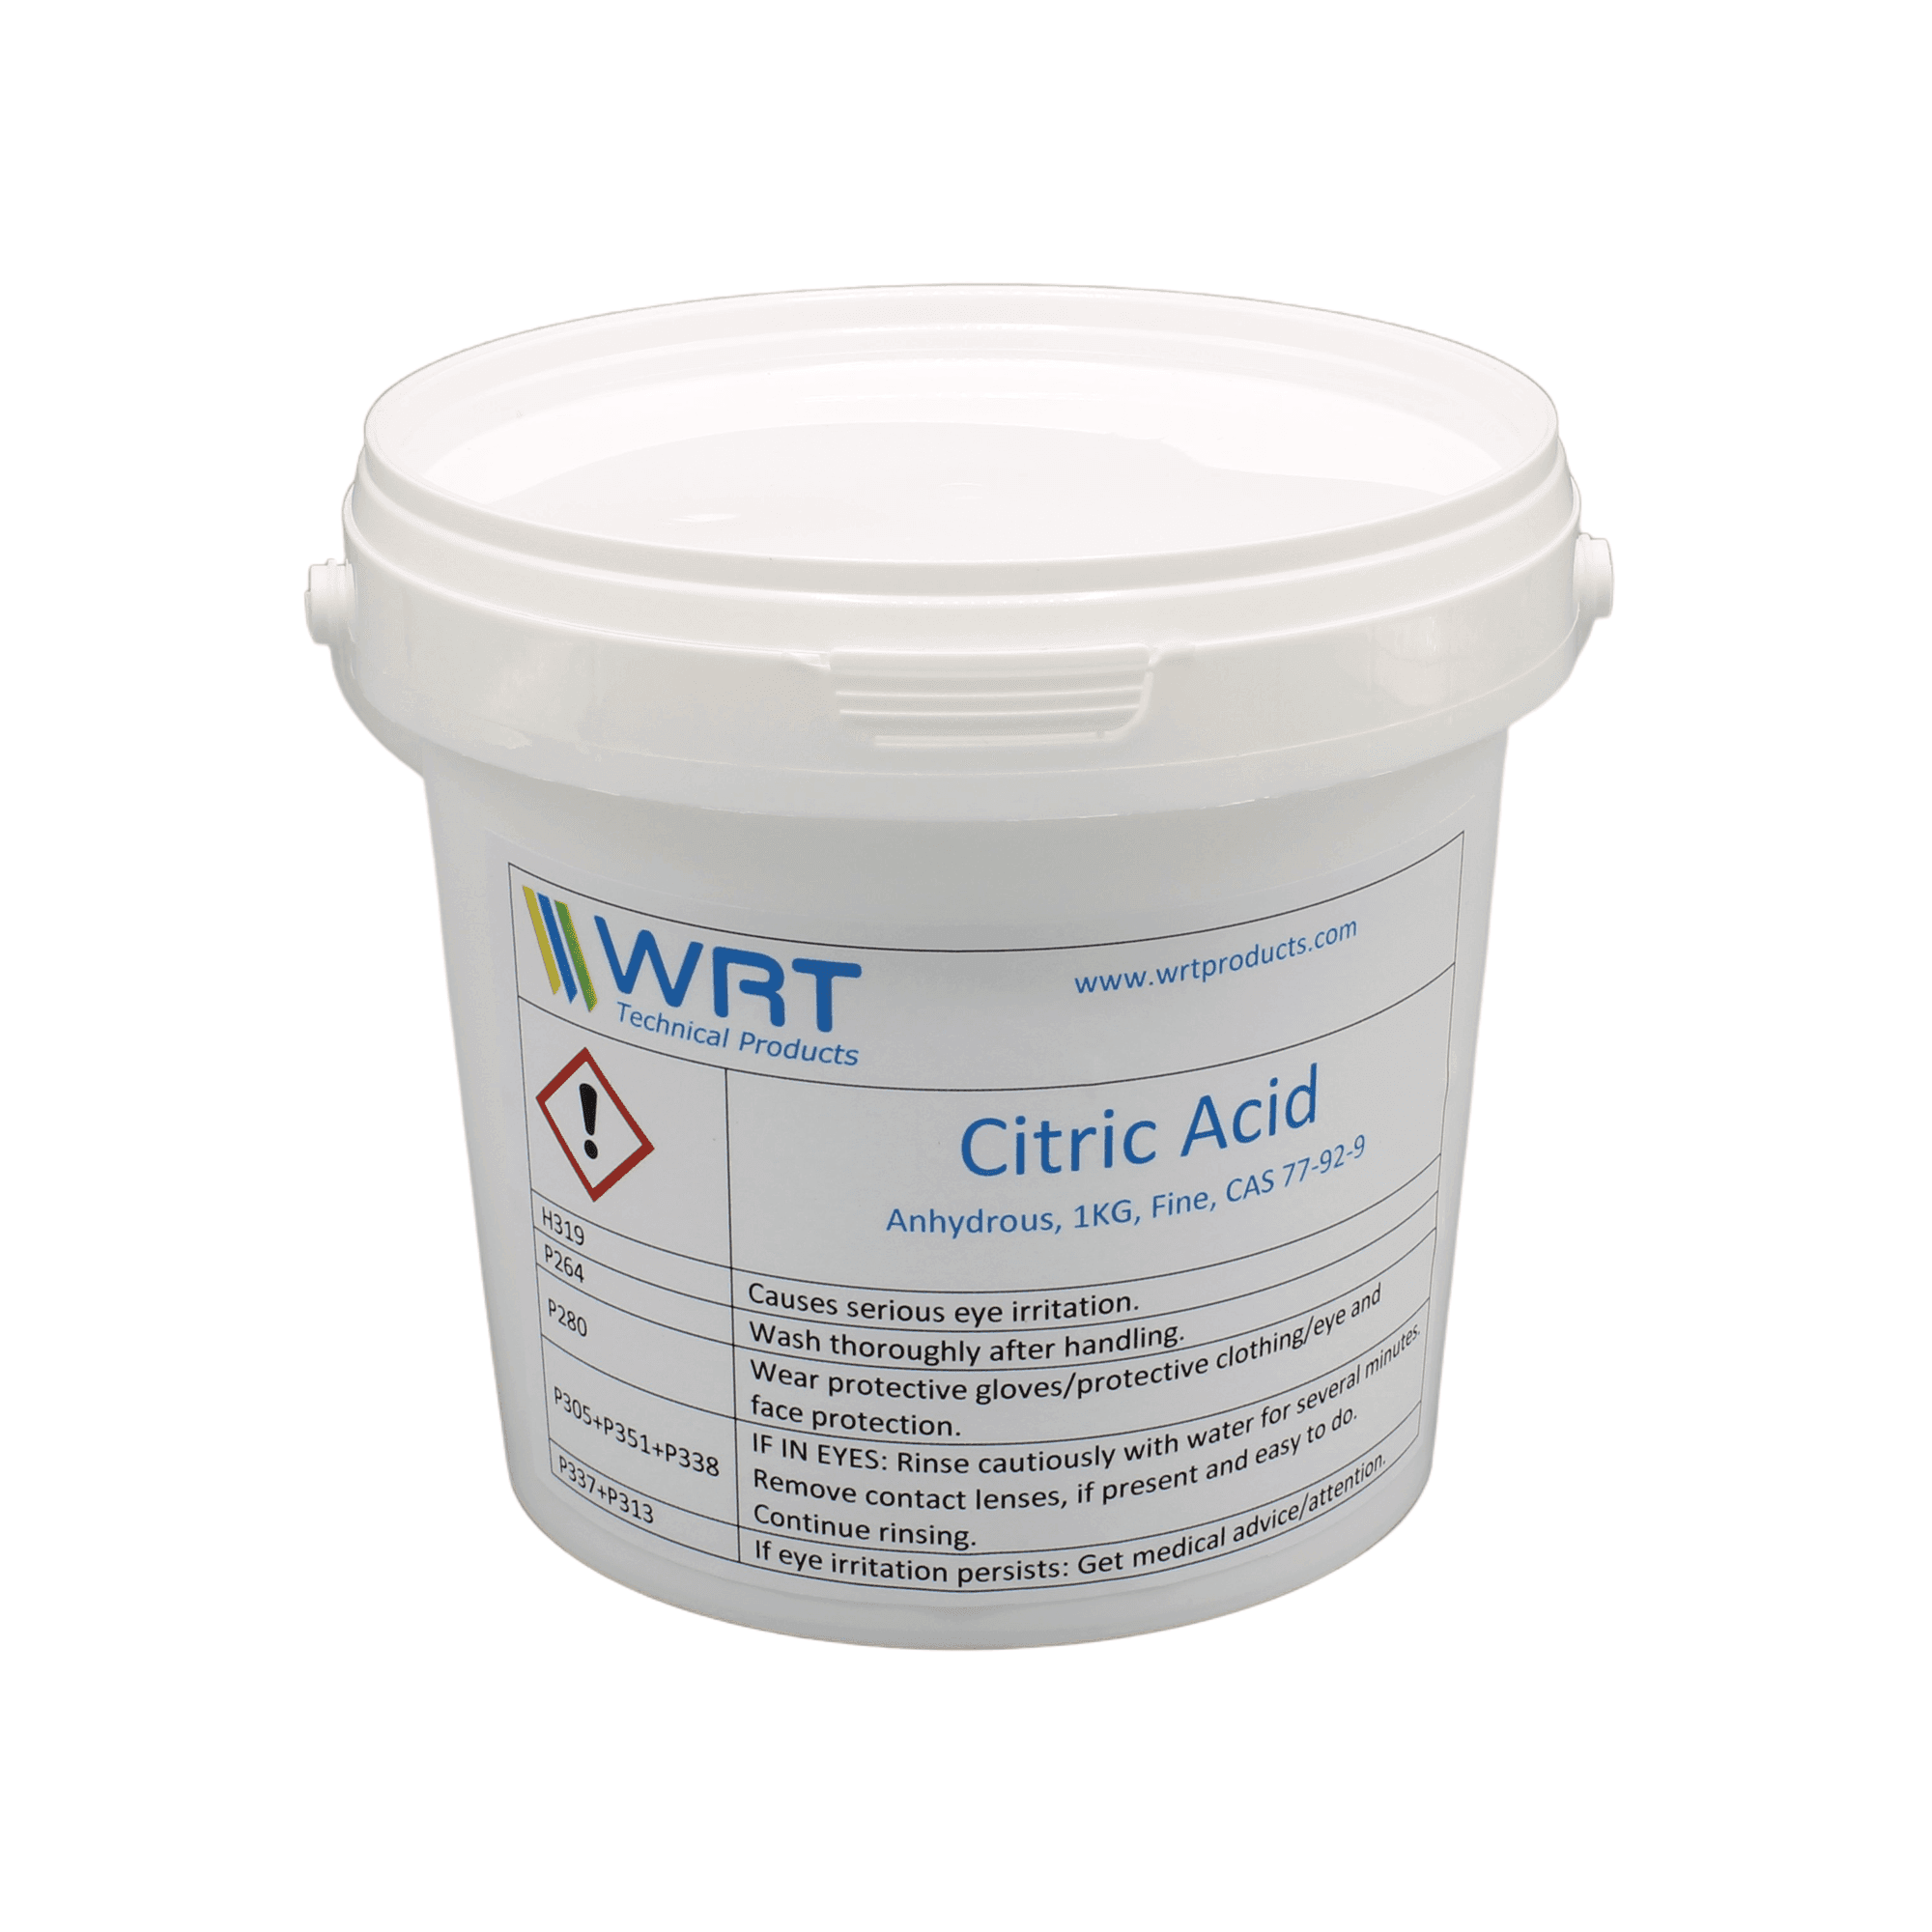 Product Citric Acid 1 kg Anhydrous Fine - WRT Products image